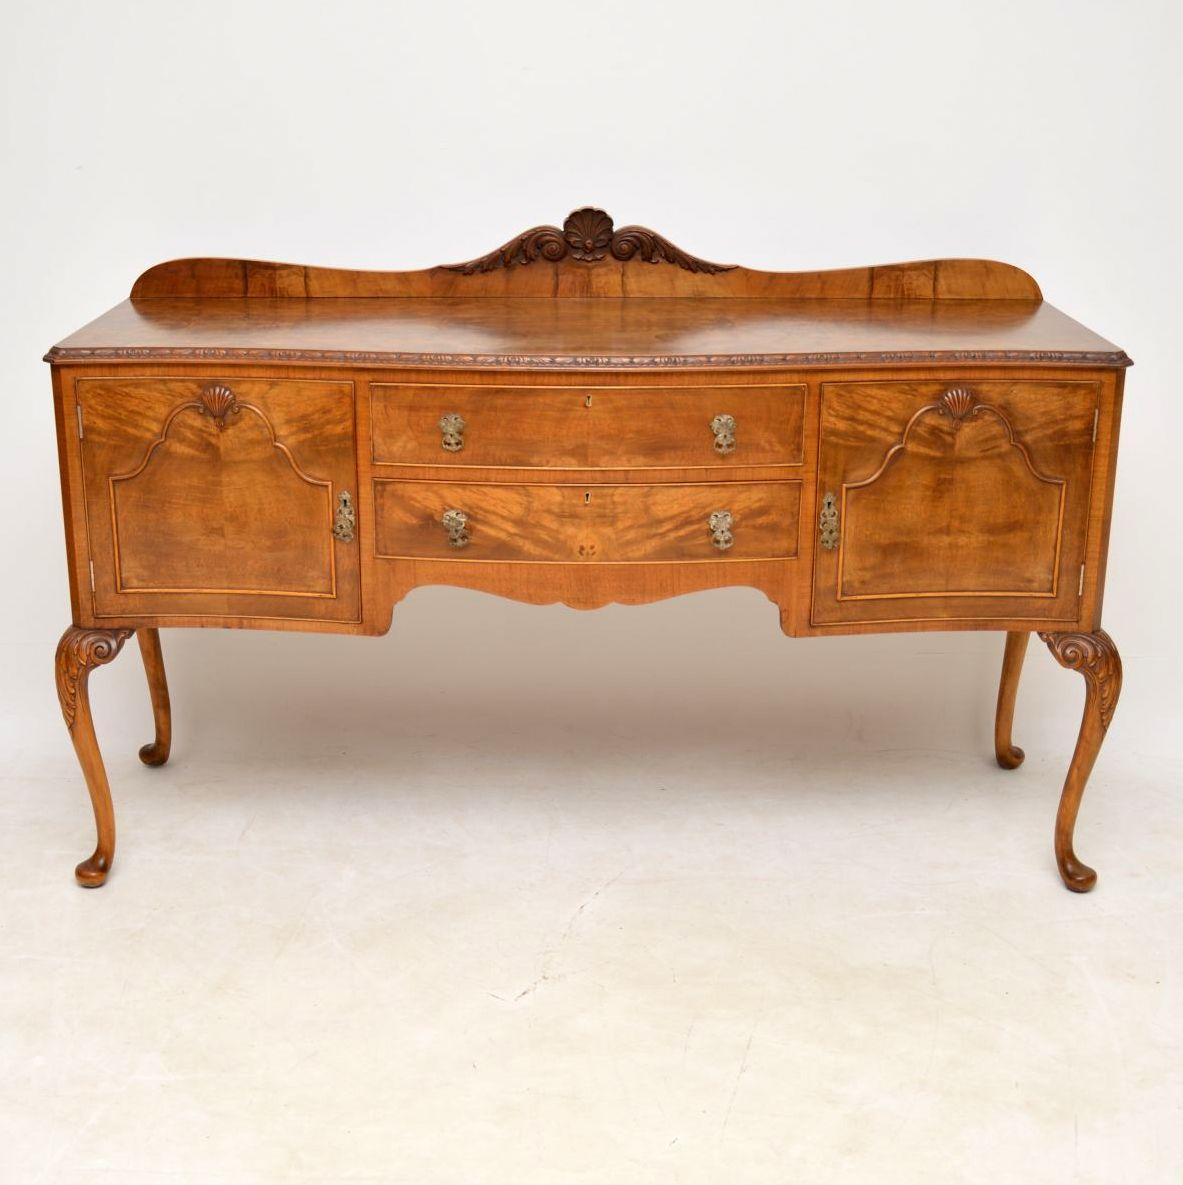 Antique Queen Anne style walnut sideboard in excellent condition and dating from the 1930s period. It’s a combination of burr walnut, figured walnut and solid walnut. This sideboard is of high quality, with a great shape and lovely color. The top